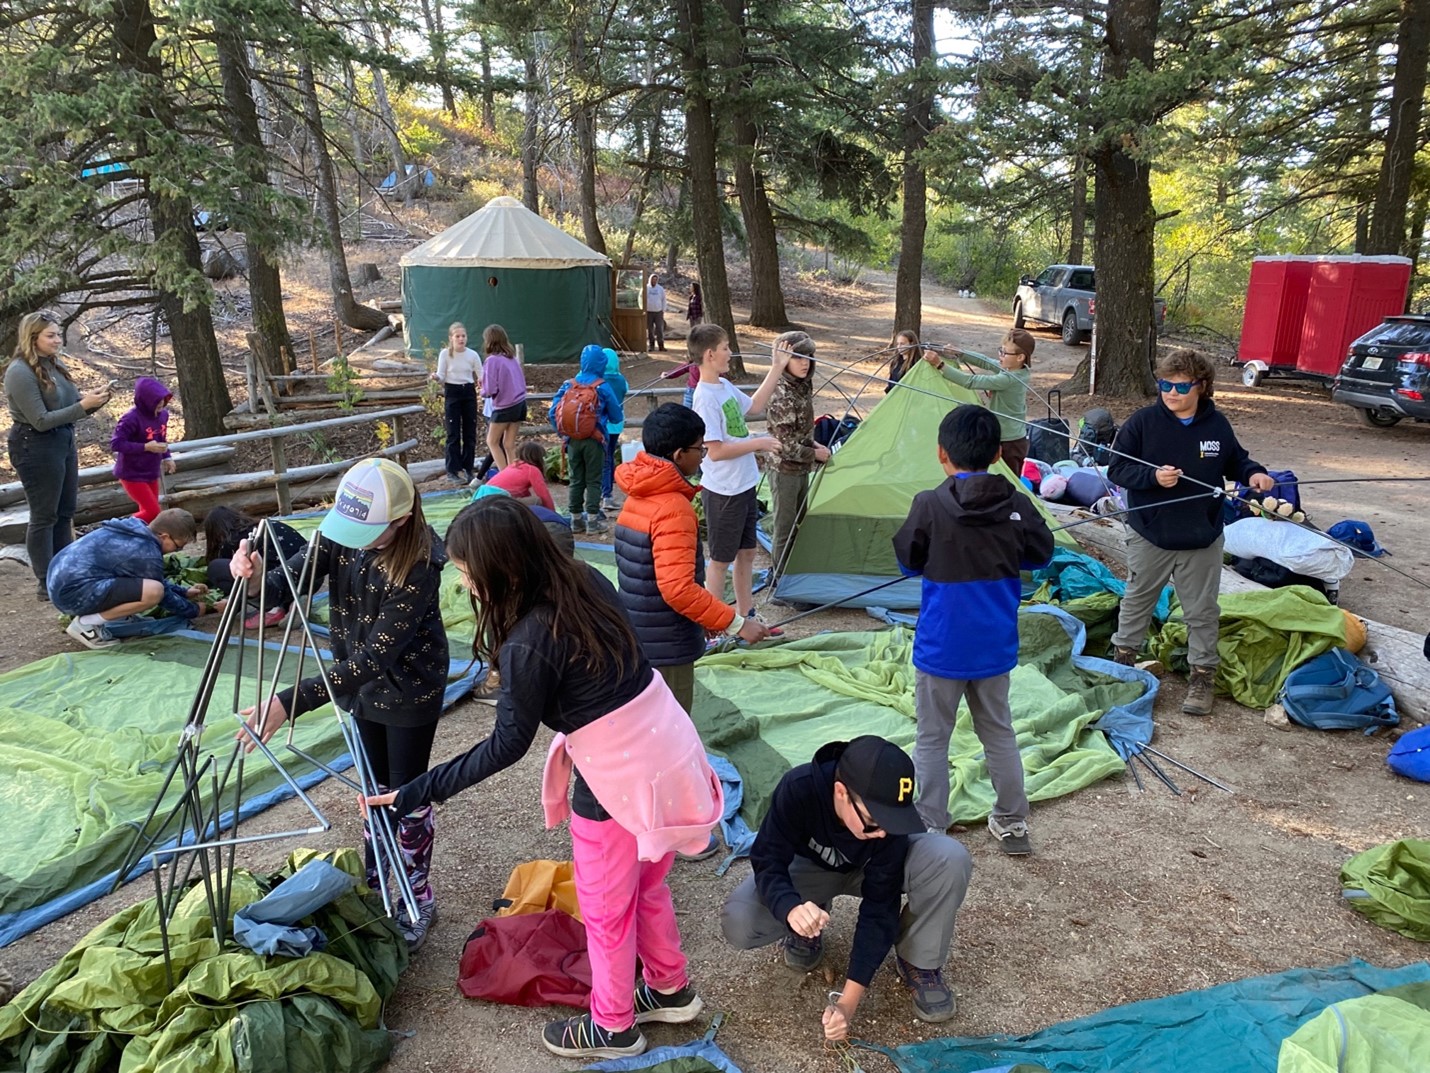 a chaotic scene of twenty fifth graders packed together on the main camping pad at Lucky Peak. each working on a different camp setup task. Some are working together on detangling tent poles, some are pounding tent stakes, some are laying out tents. The Lucky Peak yurt, douglas fir trees, and subarus are in the background